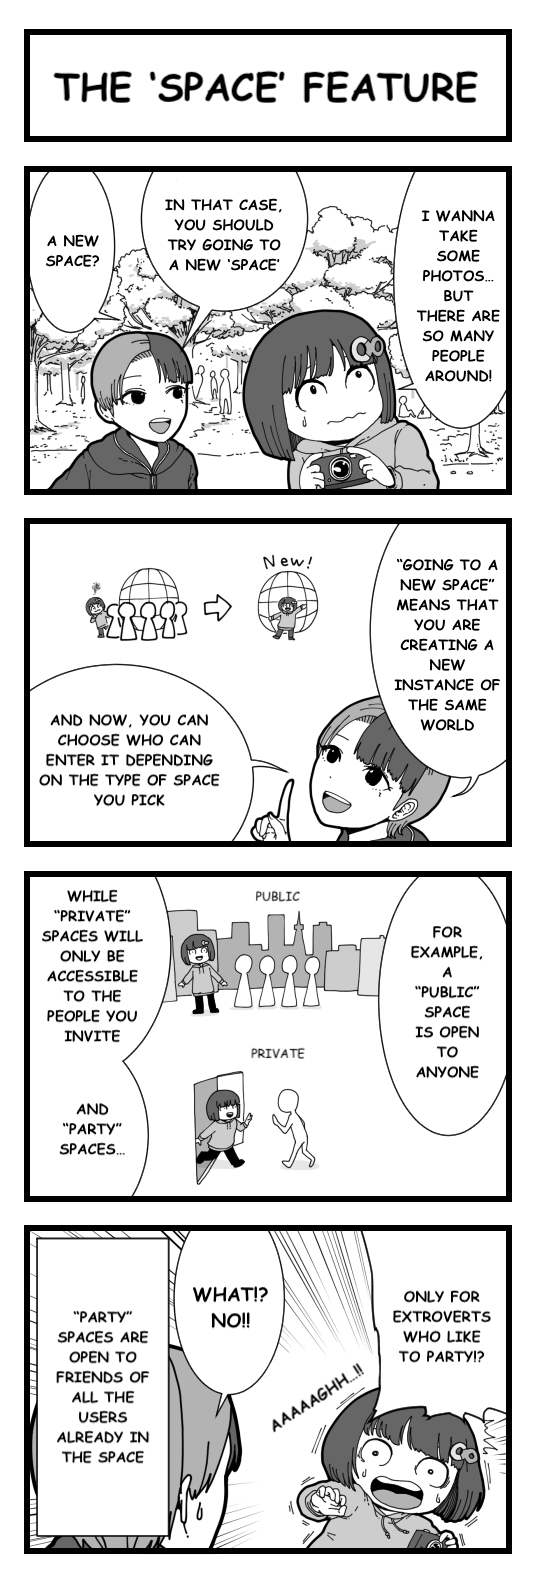 ENサーバー機能（スペース）Space Feature.png